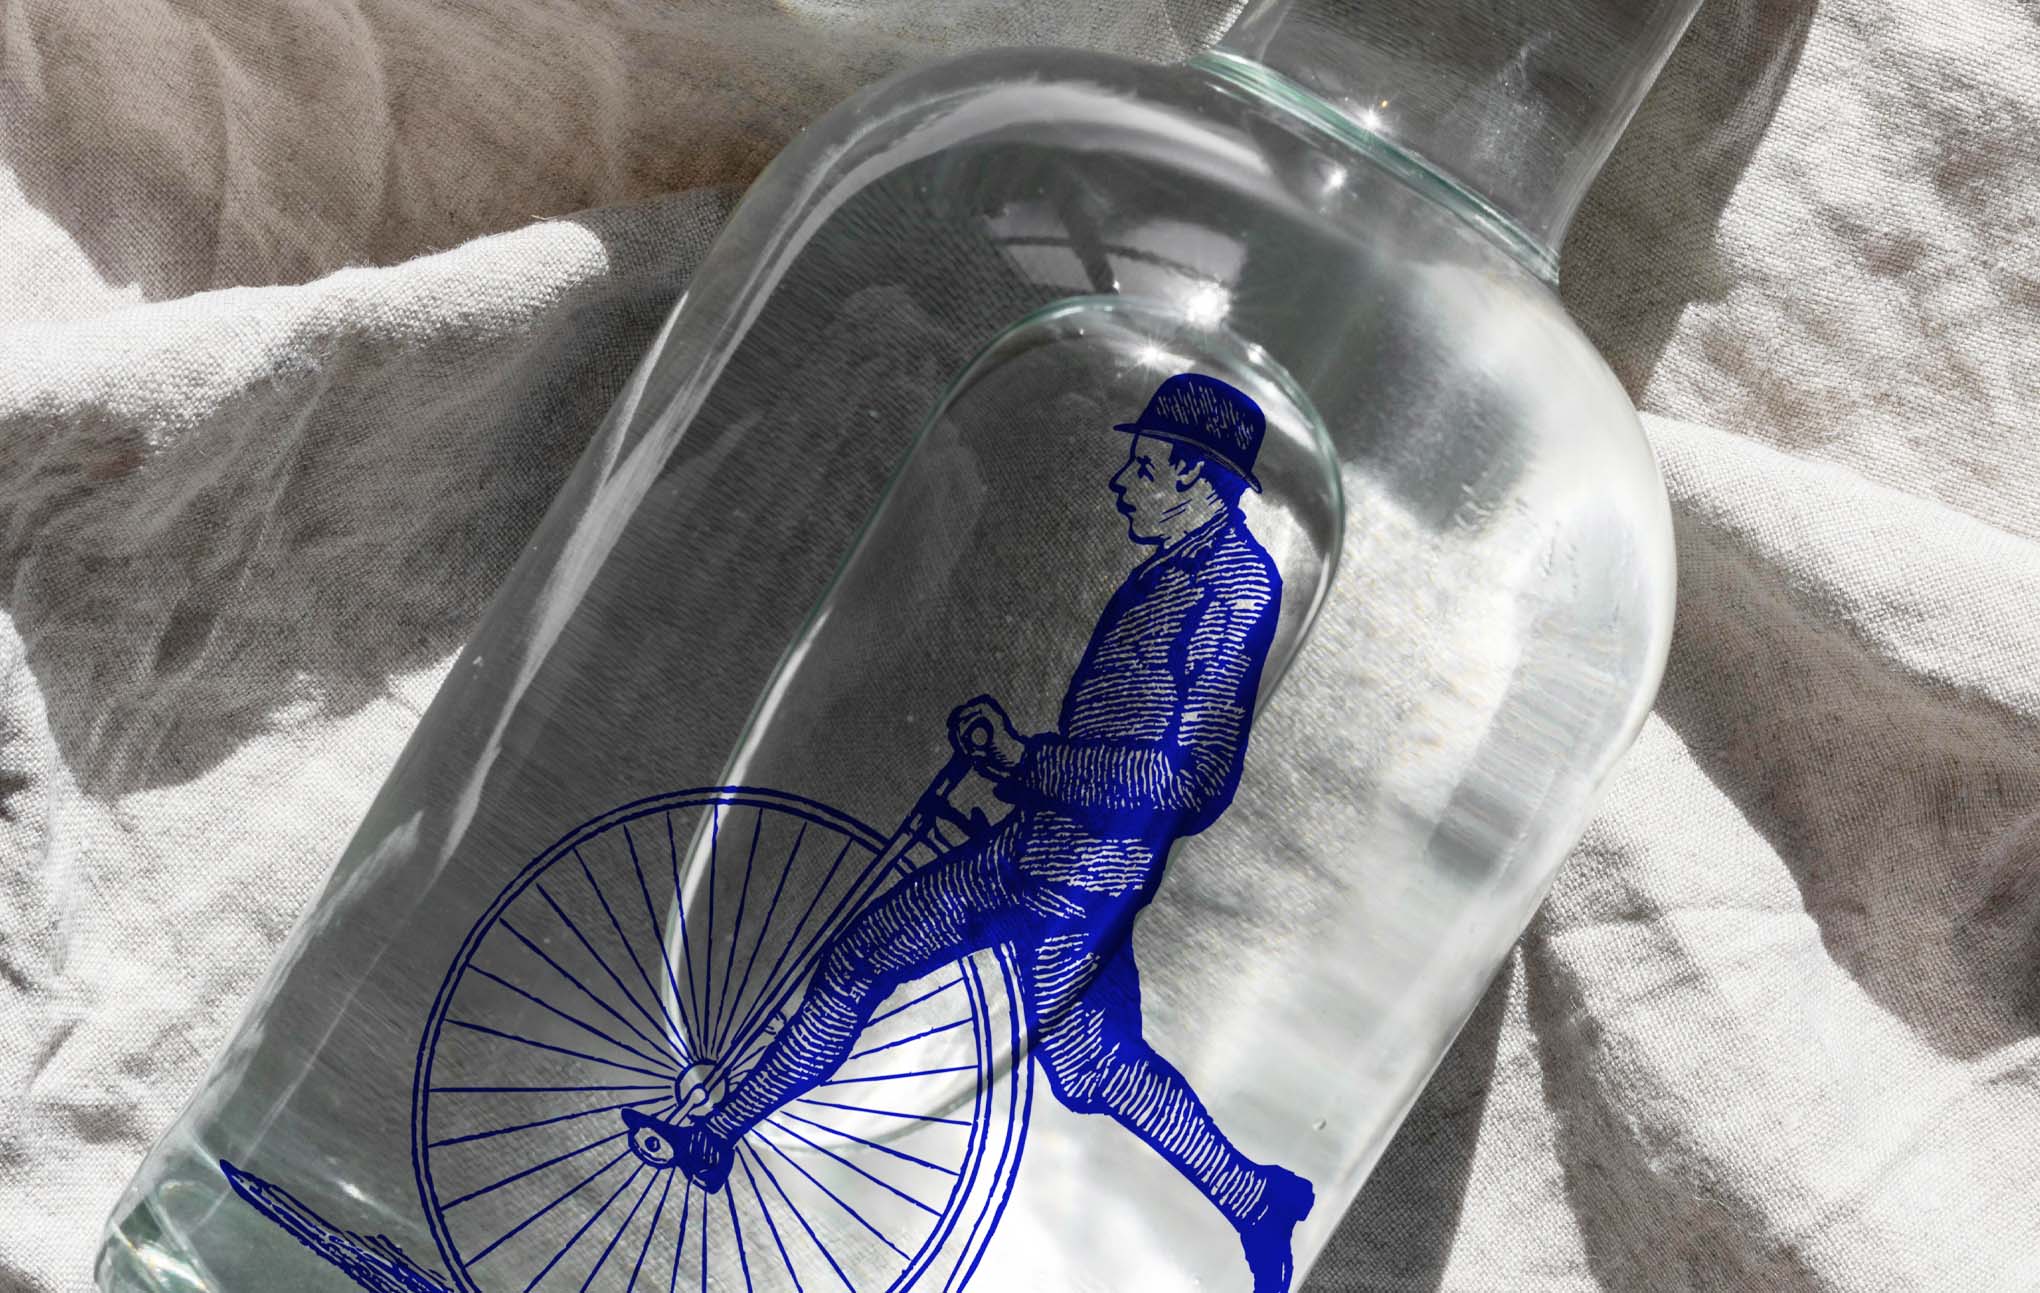 A glass bottle containing a clear spirit lies on a striped cloth. Inside the bottle, a detailed blue silhouette of a man riding an old-fashioned bicycle is displayed, creating a unique and artistic visual piece